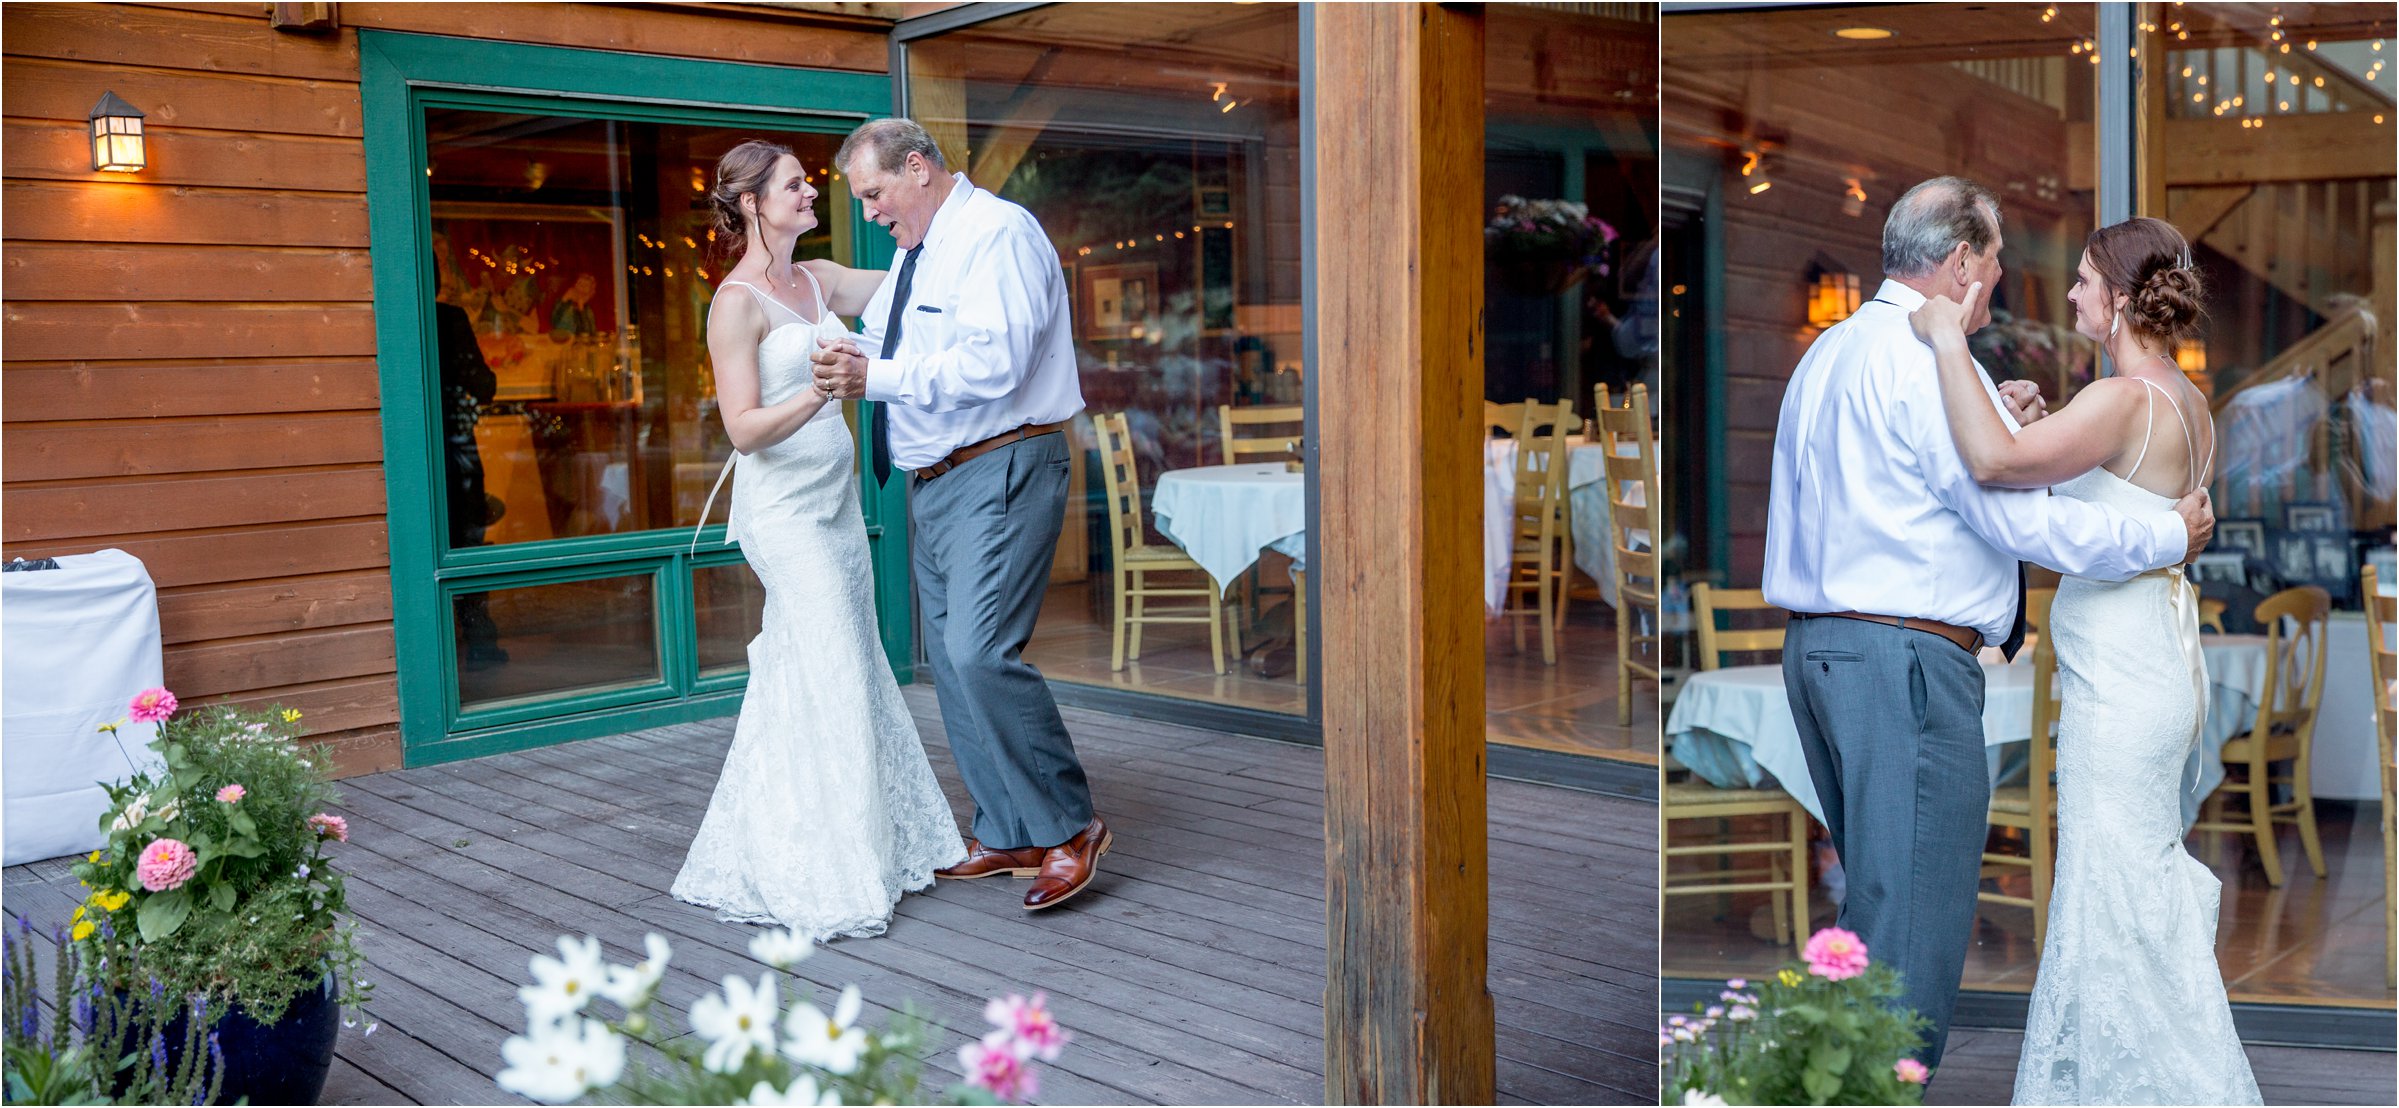 bride dances with her father at her wedding reception outside of the alpine house